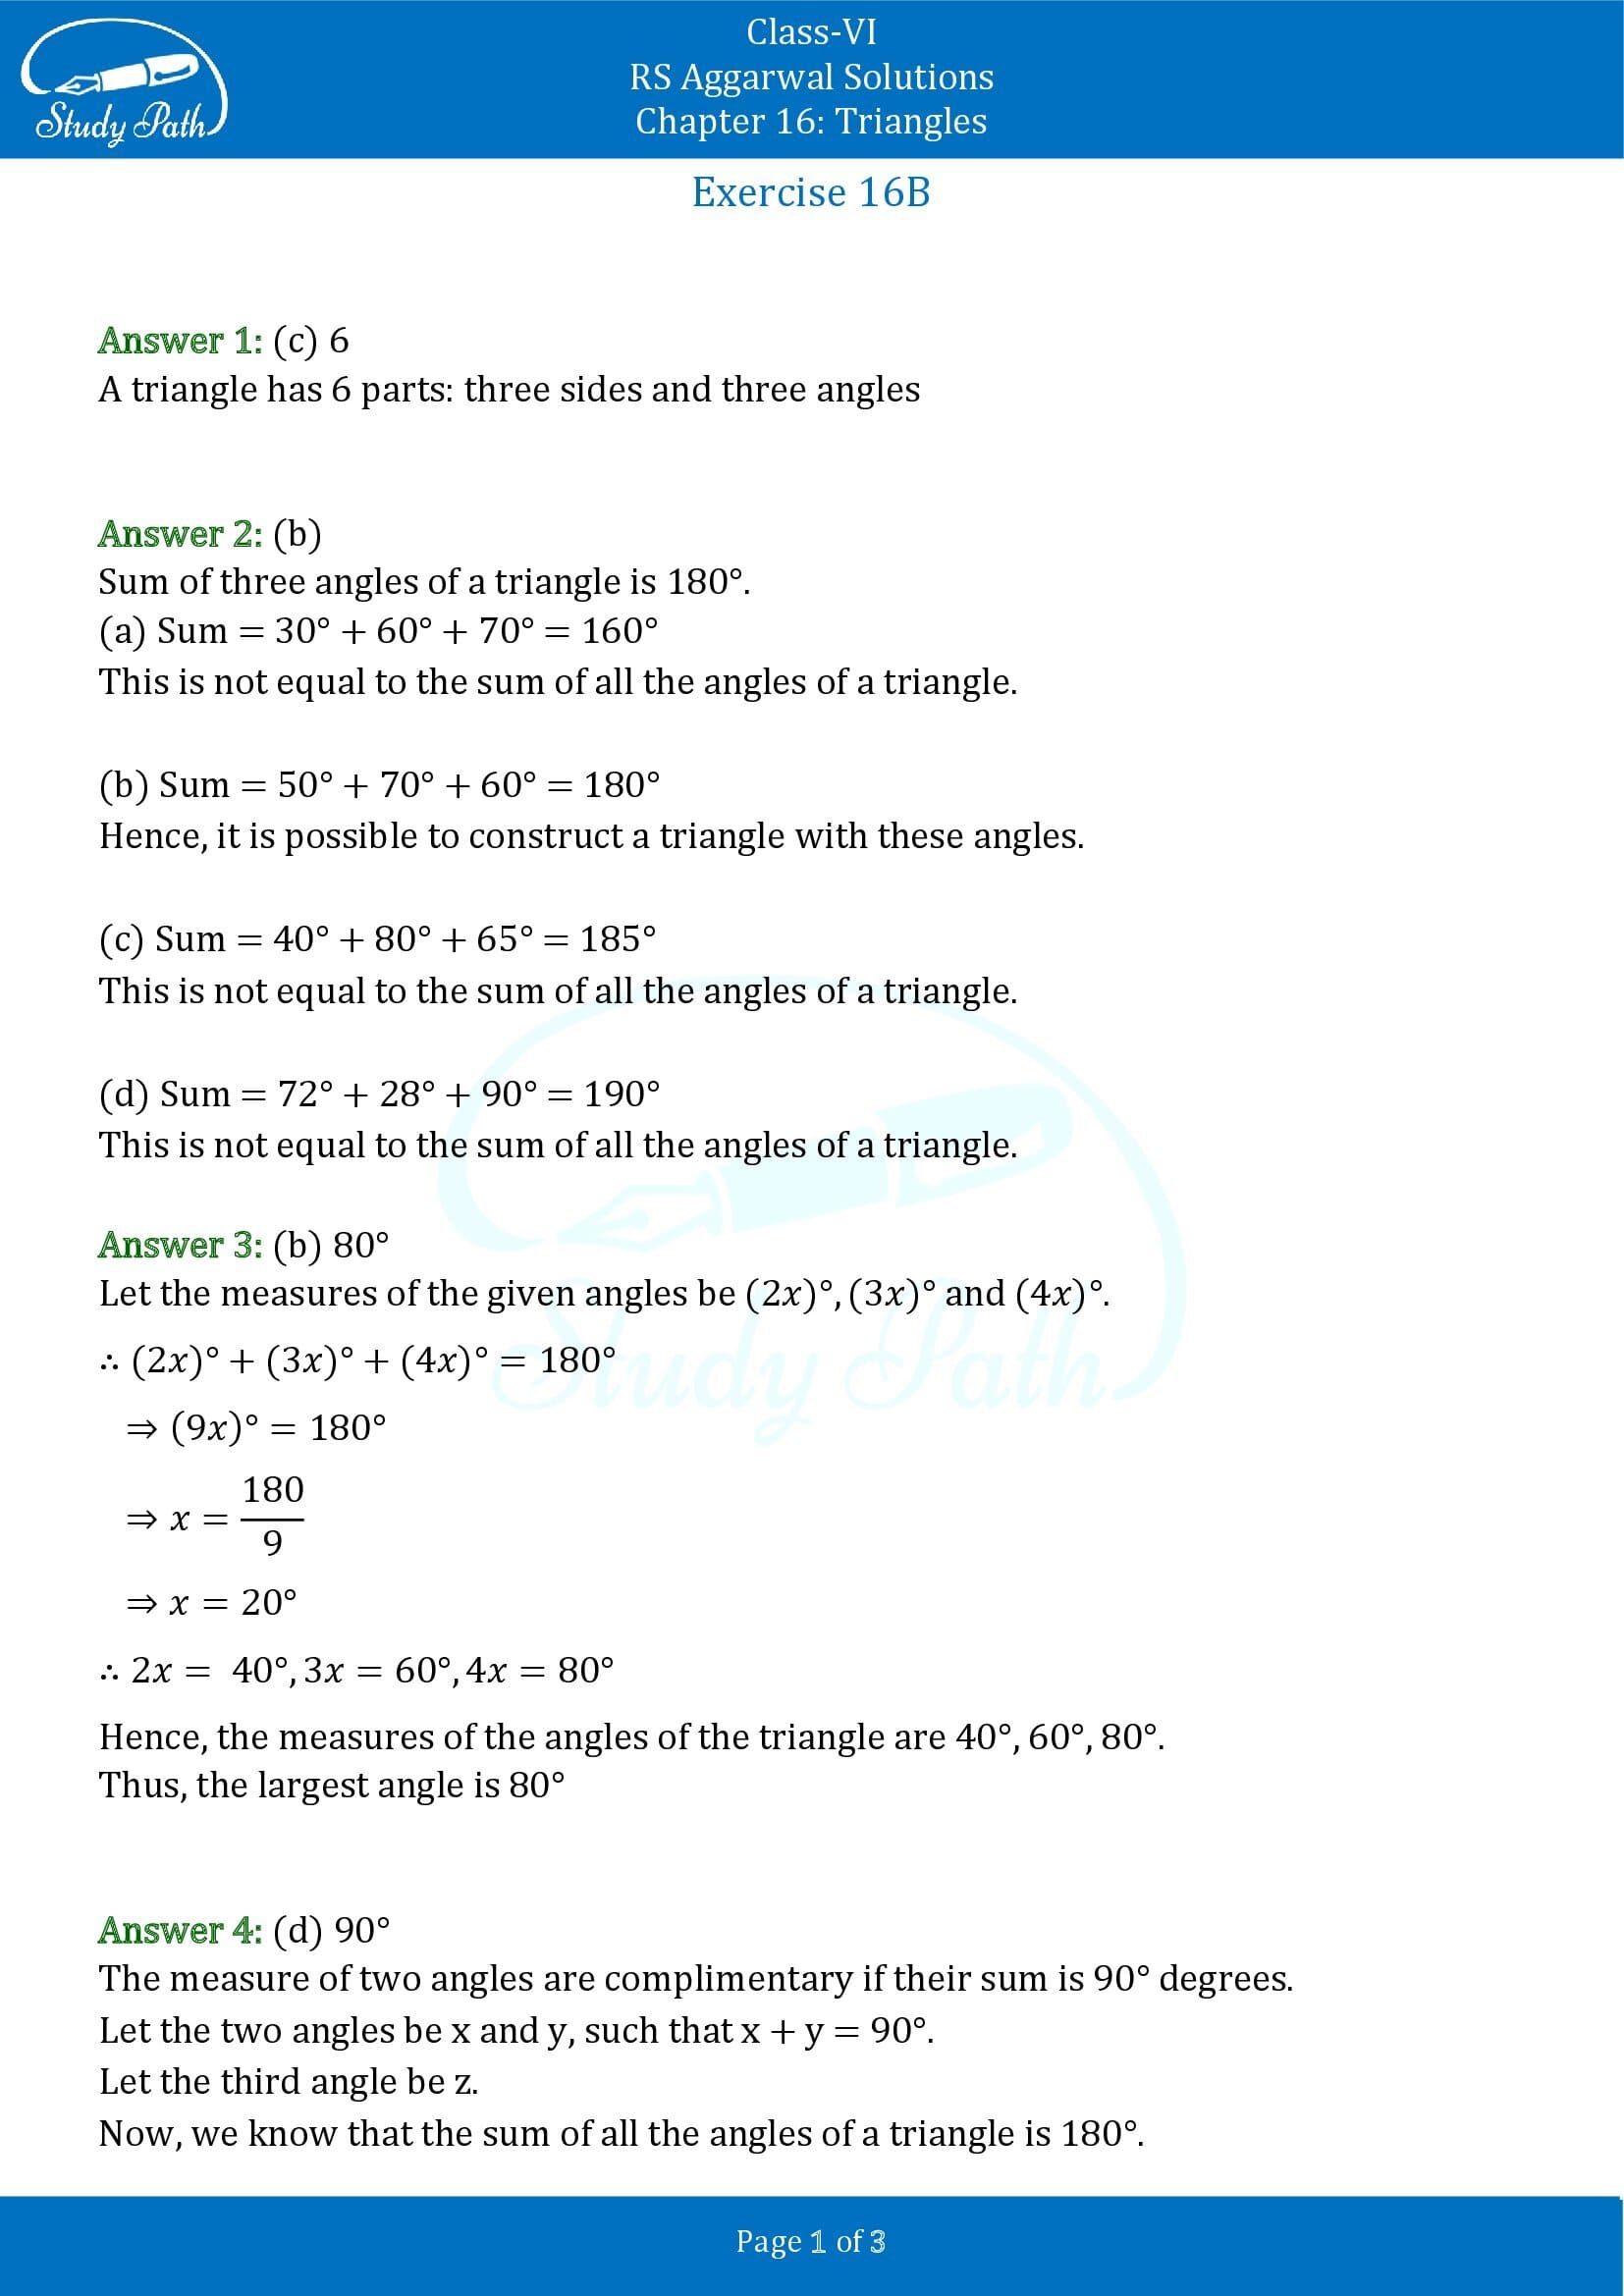 RS Aggarwal Solutions Class 6 Chapter 16 Triangles Exercise 16B MCQs 00001